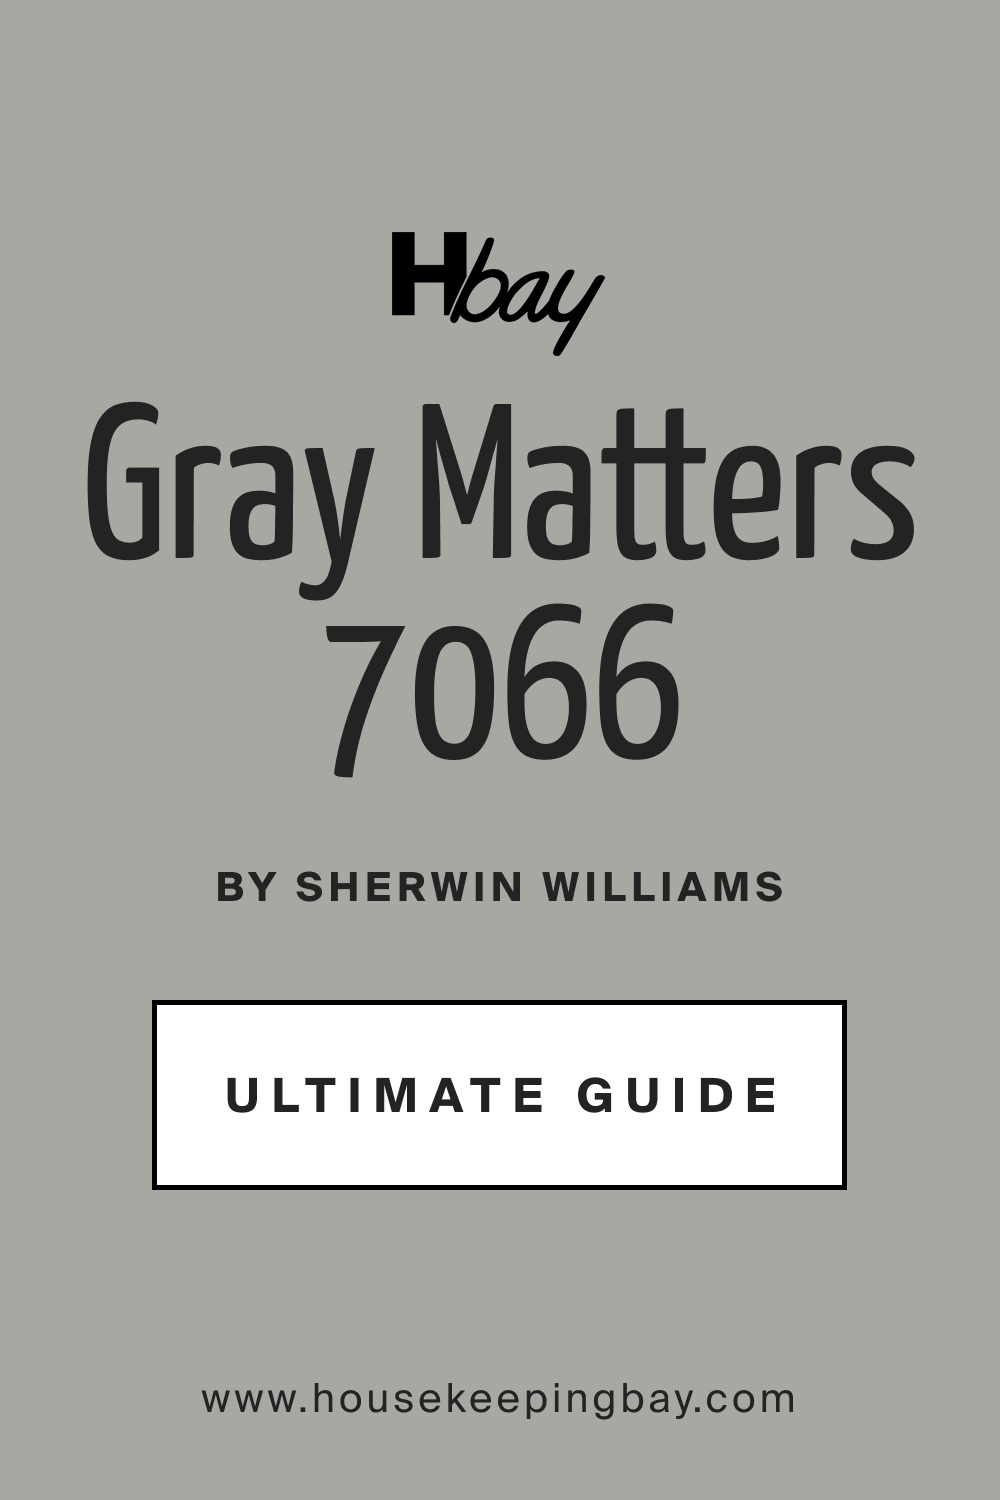 Gray Matters SW 7066 by Sherwin Williams Ultimate Guide